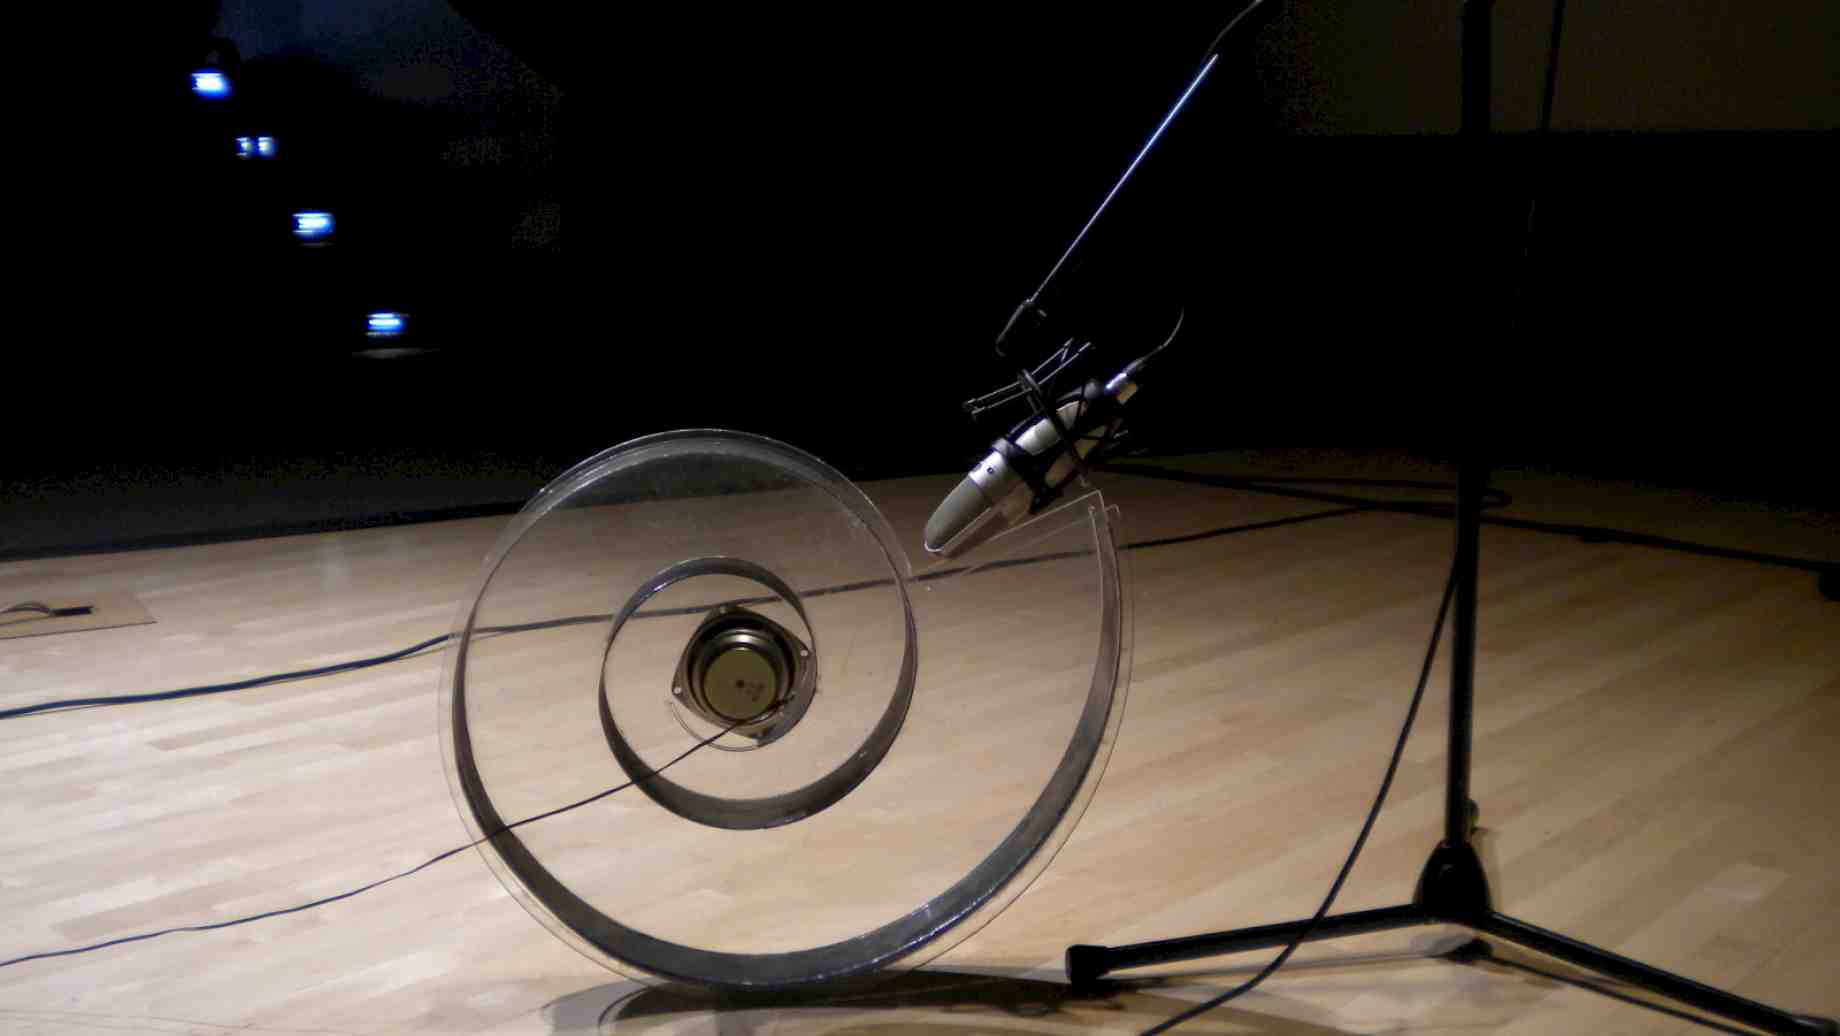 Sound Sculpture created by graduate student composer